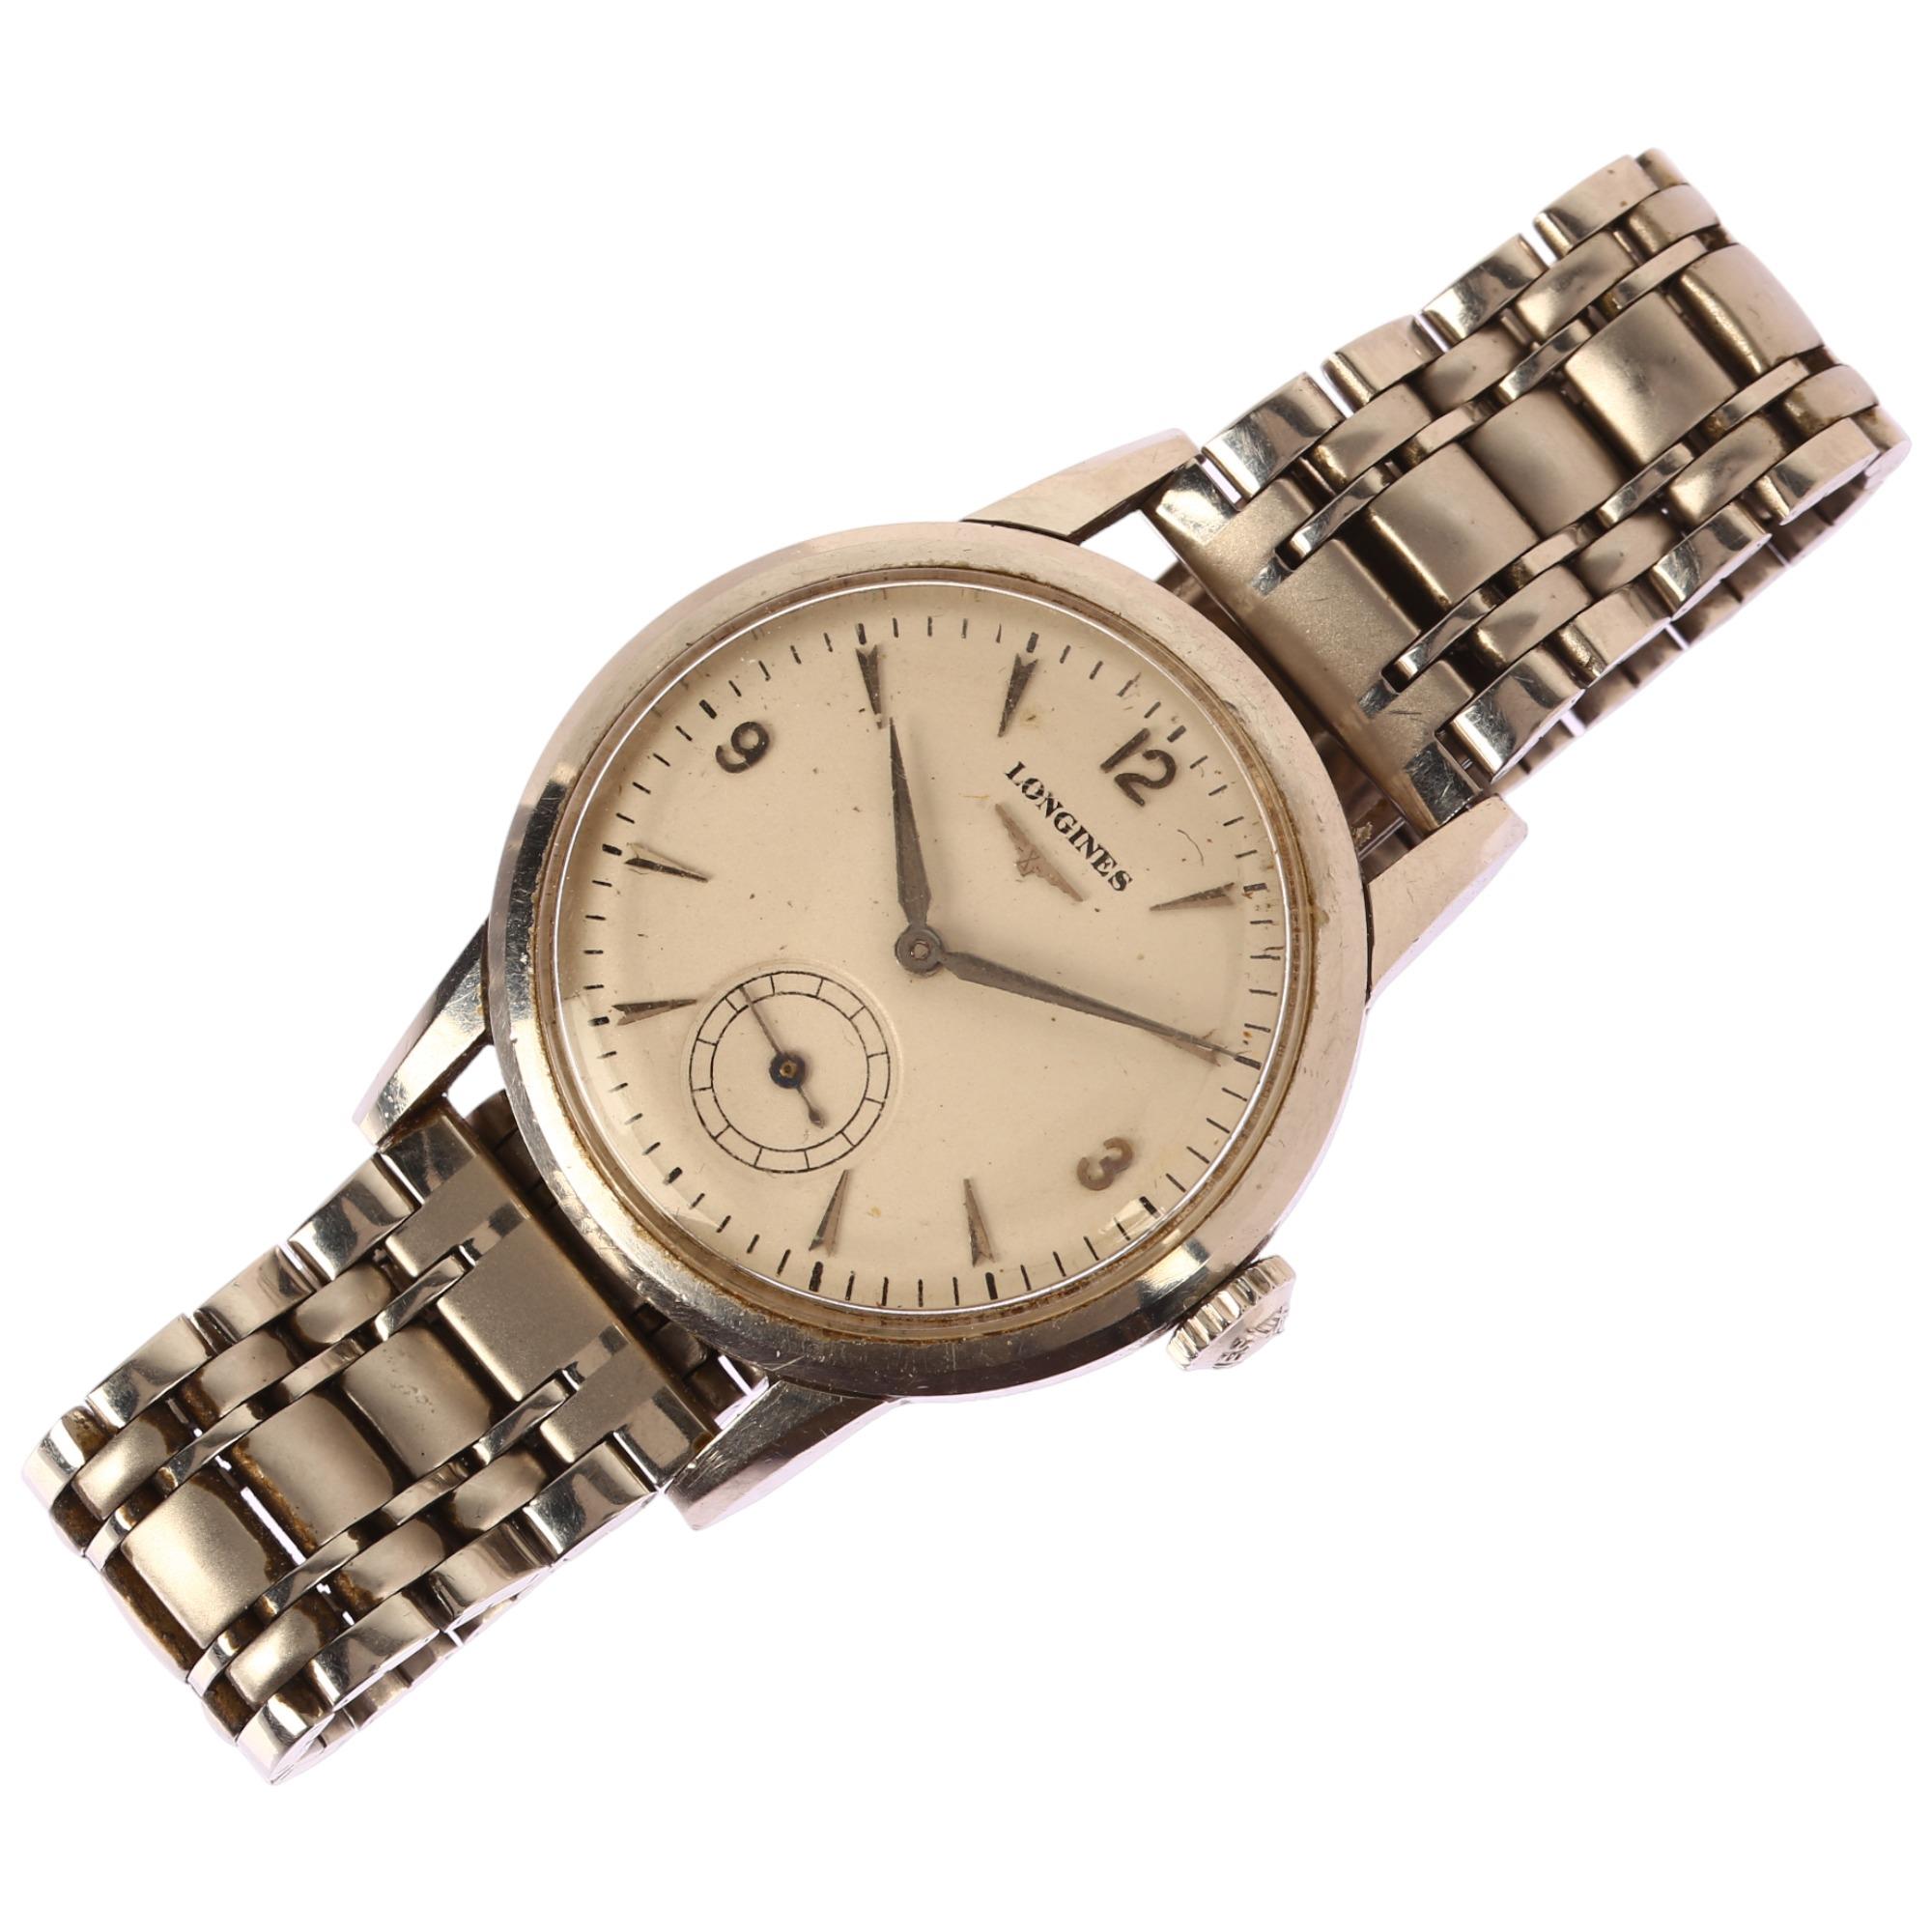 LONGINES - a Vintage stainless steel mechanical bracelet watch, circa 1960s, silvered dial with - Image 2 of 5